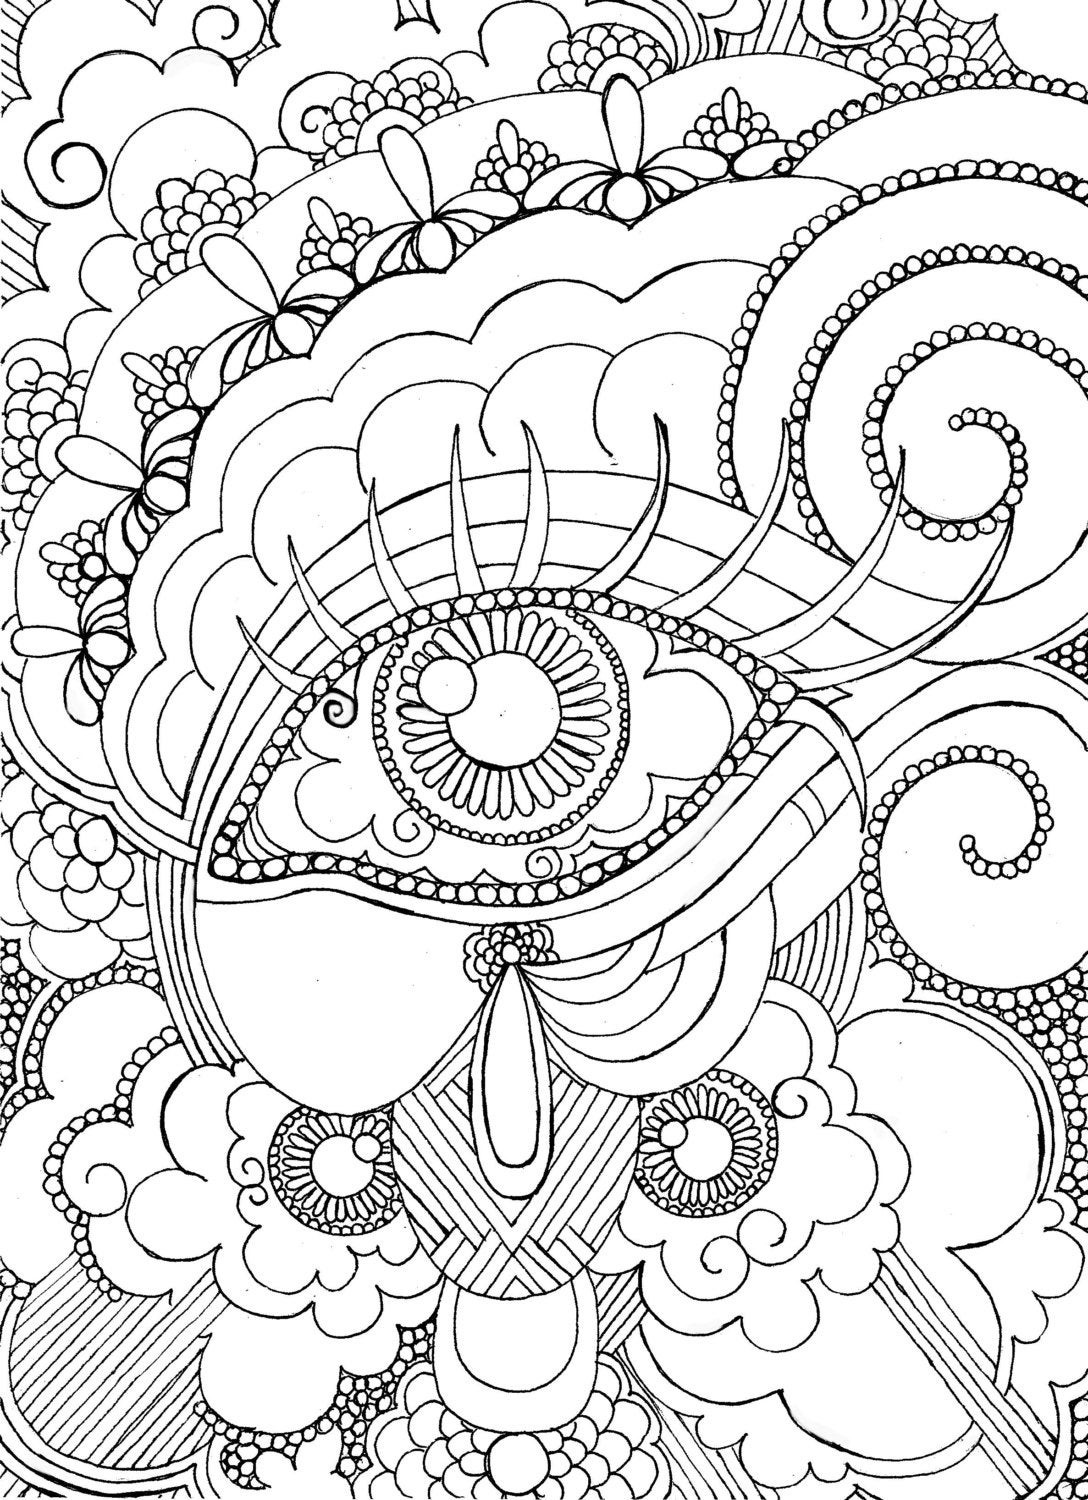 Coloring Sheet For Adults
 Eye Want To Be Colored Adult Coloring Page Steampunk